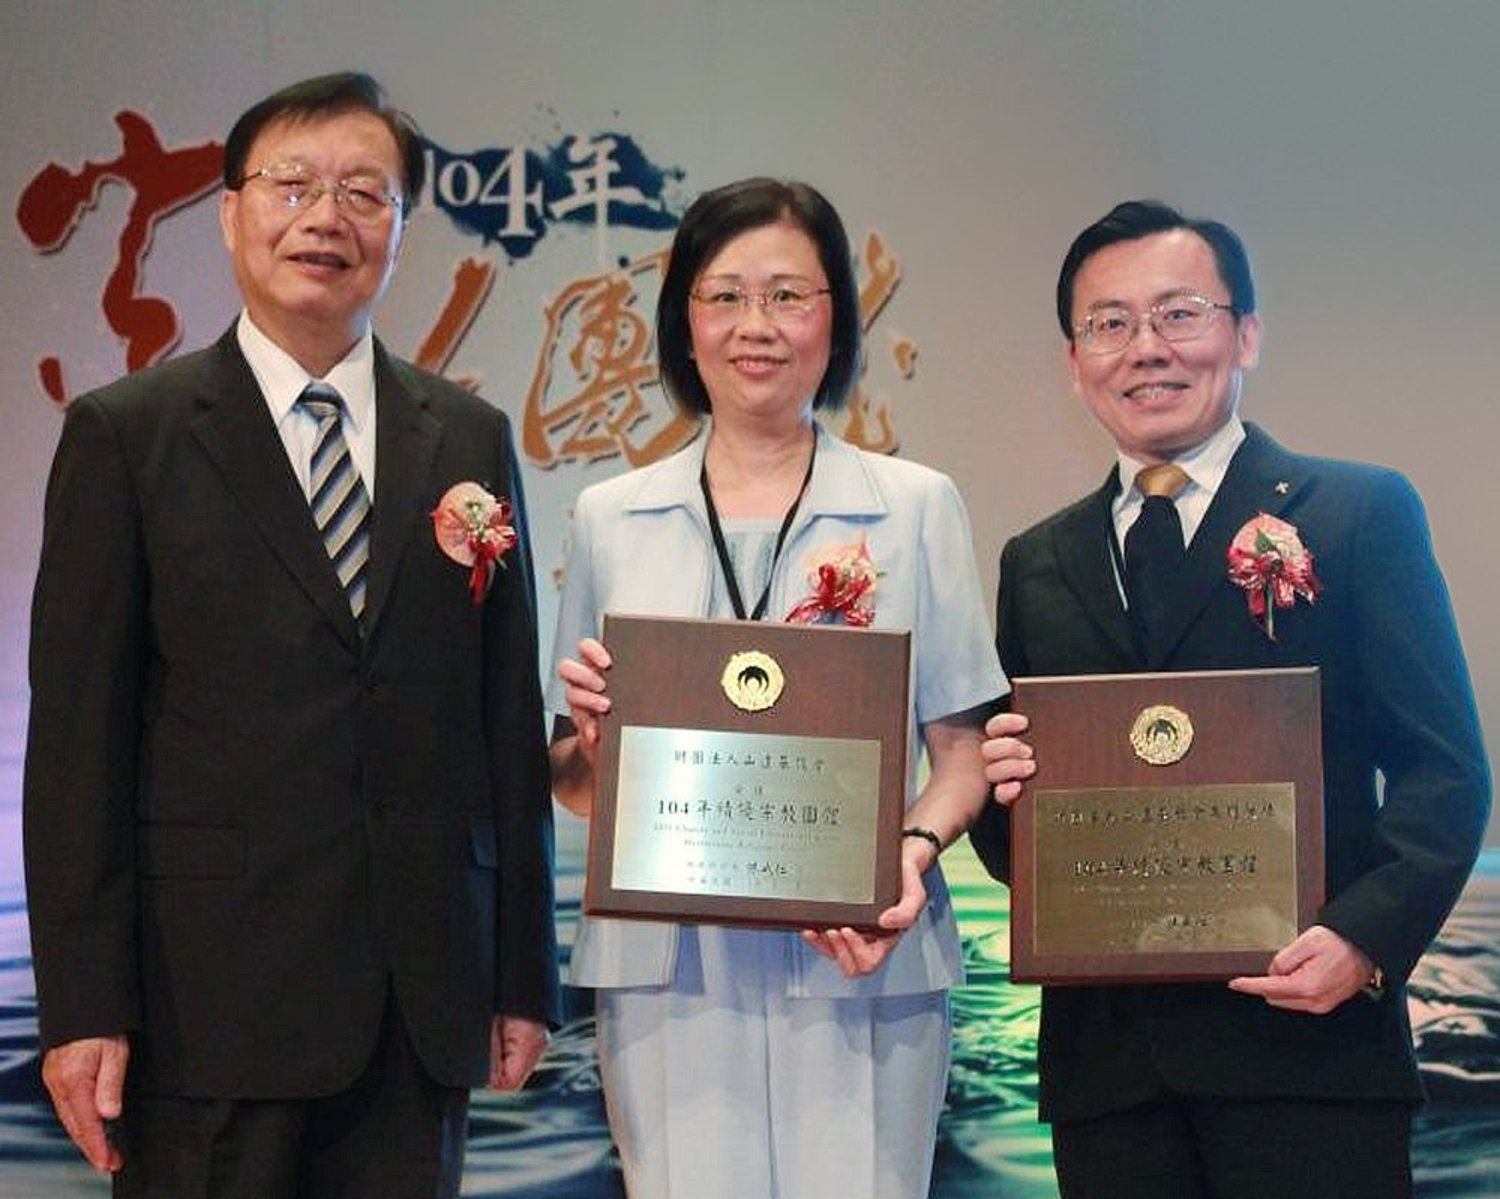 (Left to right) Taiwan Minister of Interior Mr. Chin Wei-zen presented chief executive of the Church of Scientology Taiwan Ms. Sunny Fu and Dr. Oliver Hseuh, Executive Director, Church of Scientology.